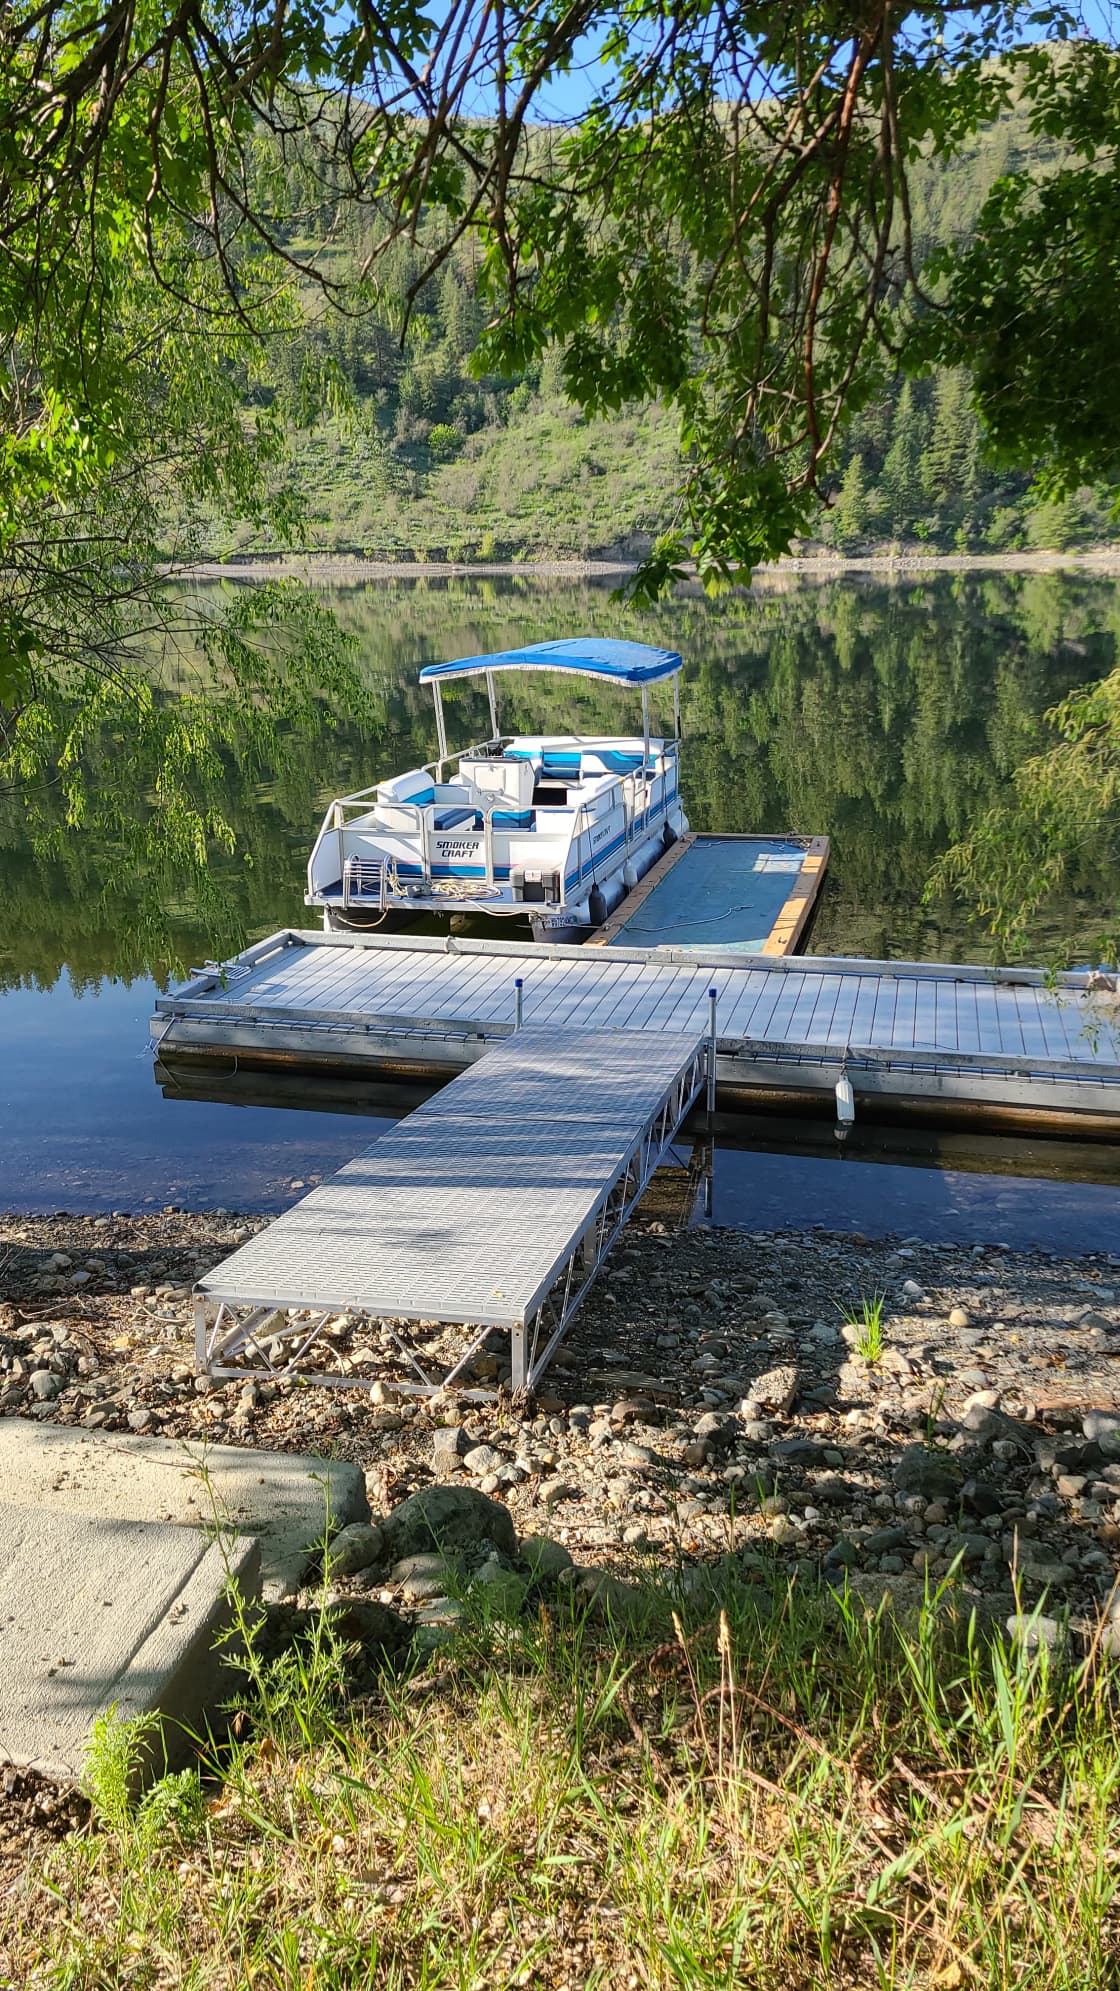 By late August the reservoir lake level drops significantly, so we take advantage of the floating docks to move our access as needed.